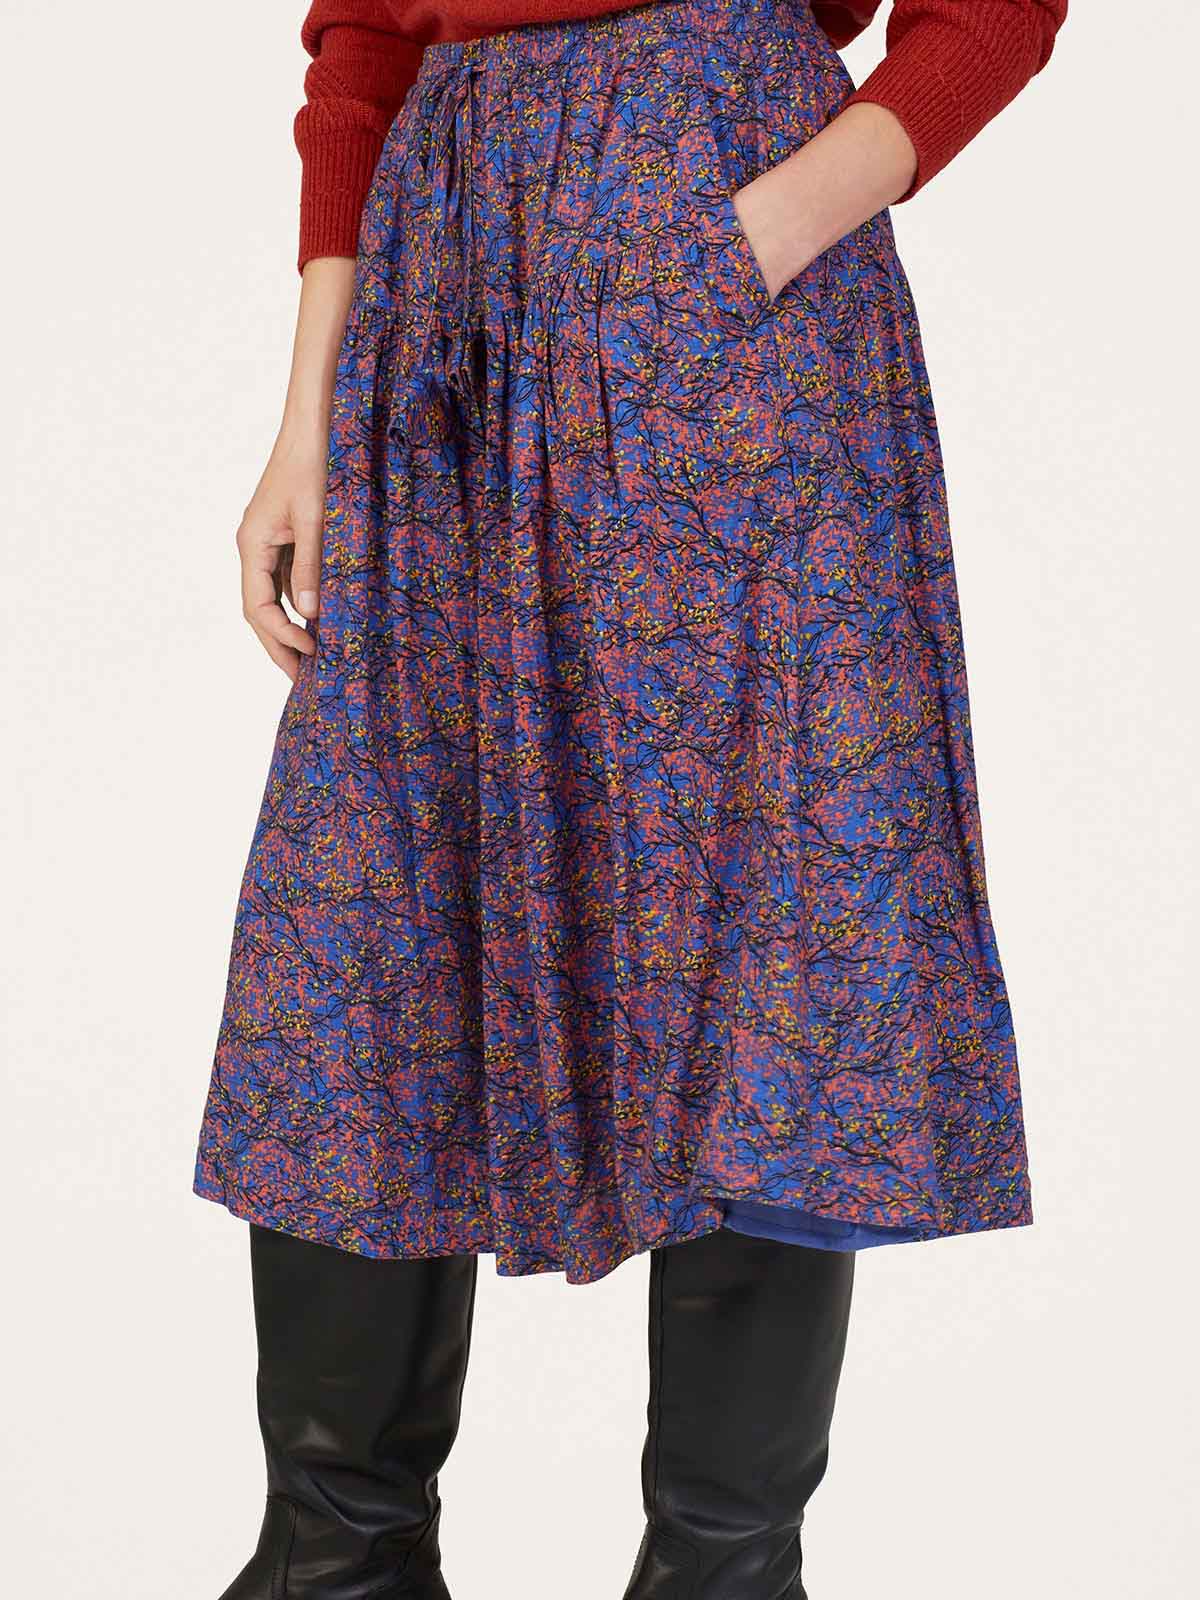 Fawn Lenzing™ Ecovero™ Printed Skirt - Periwinkle Blue